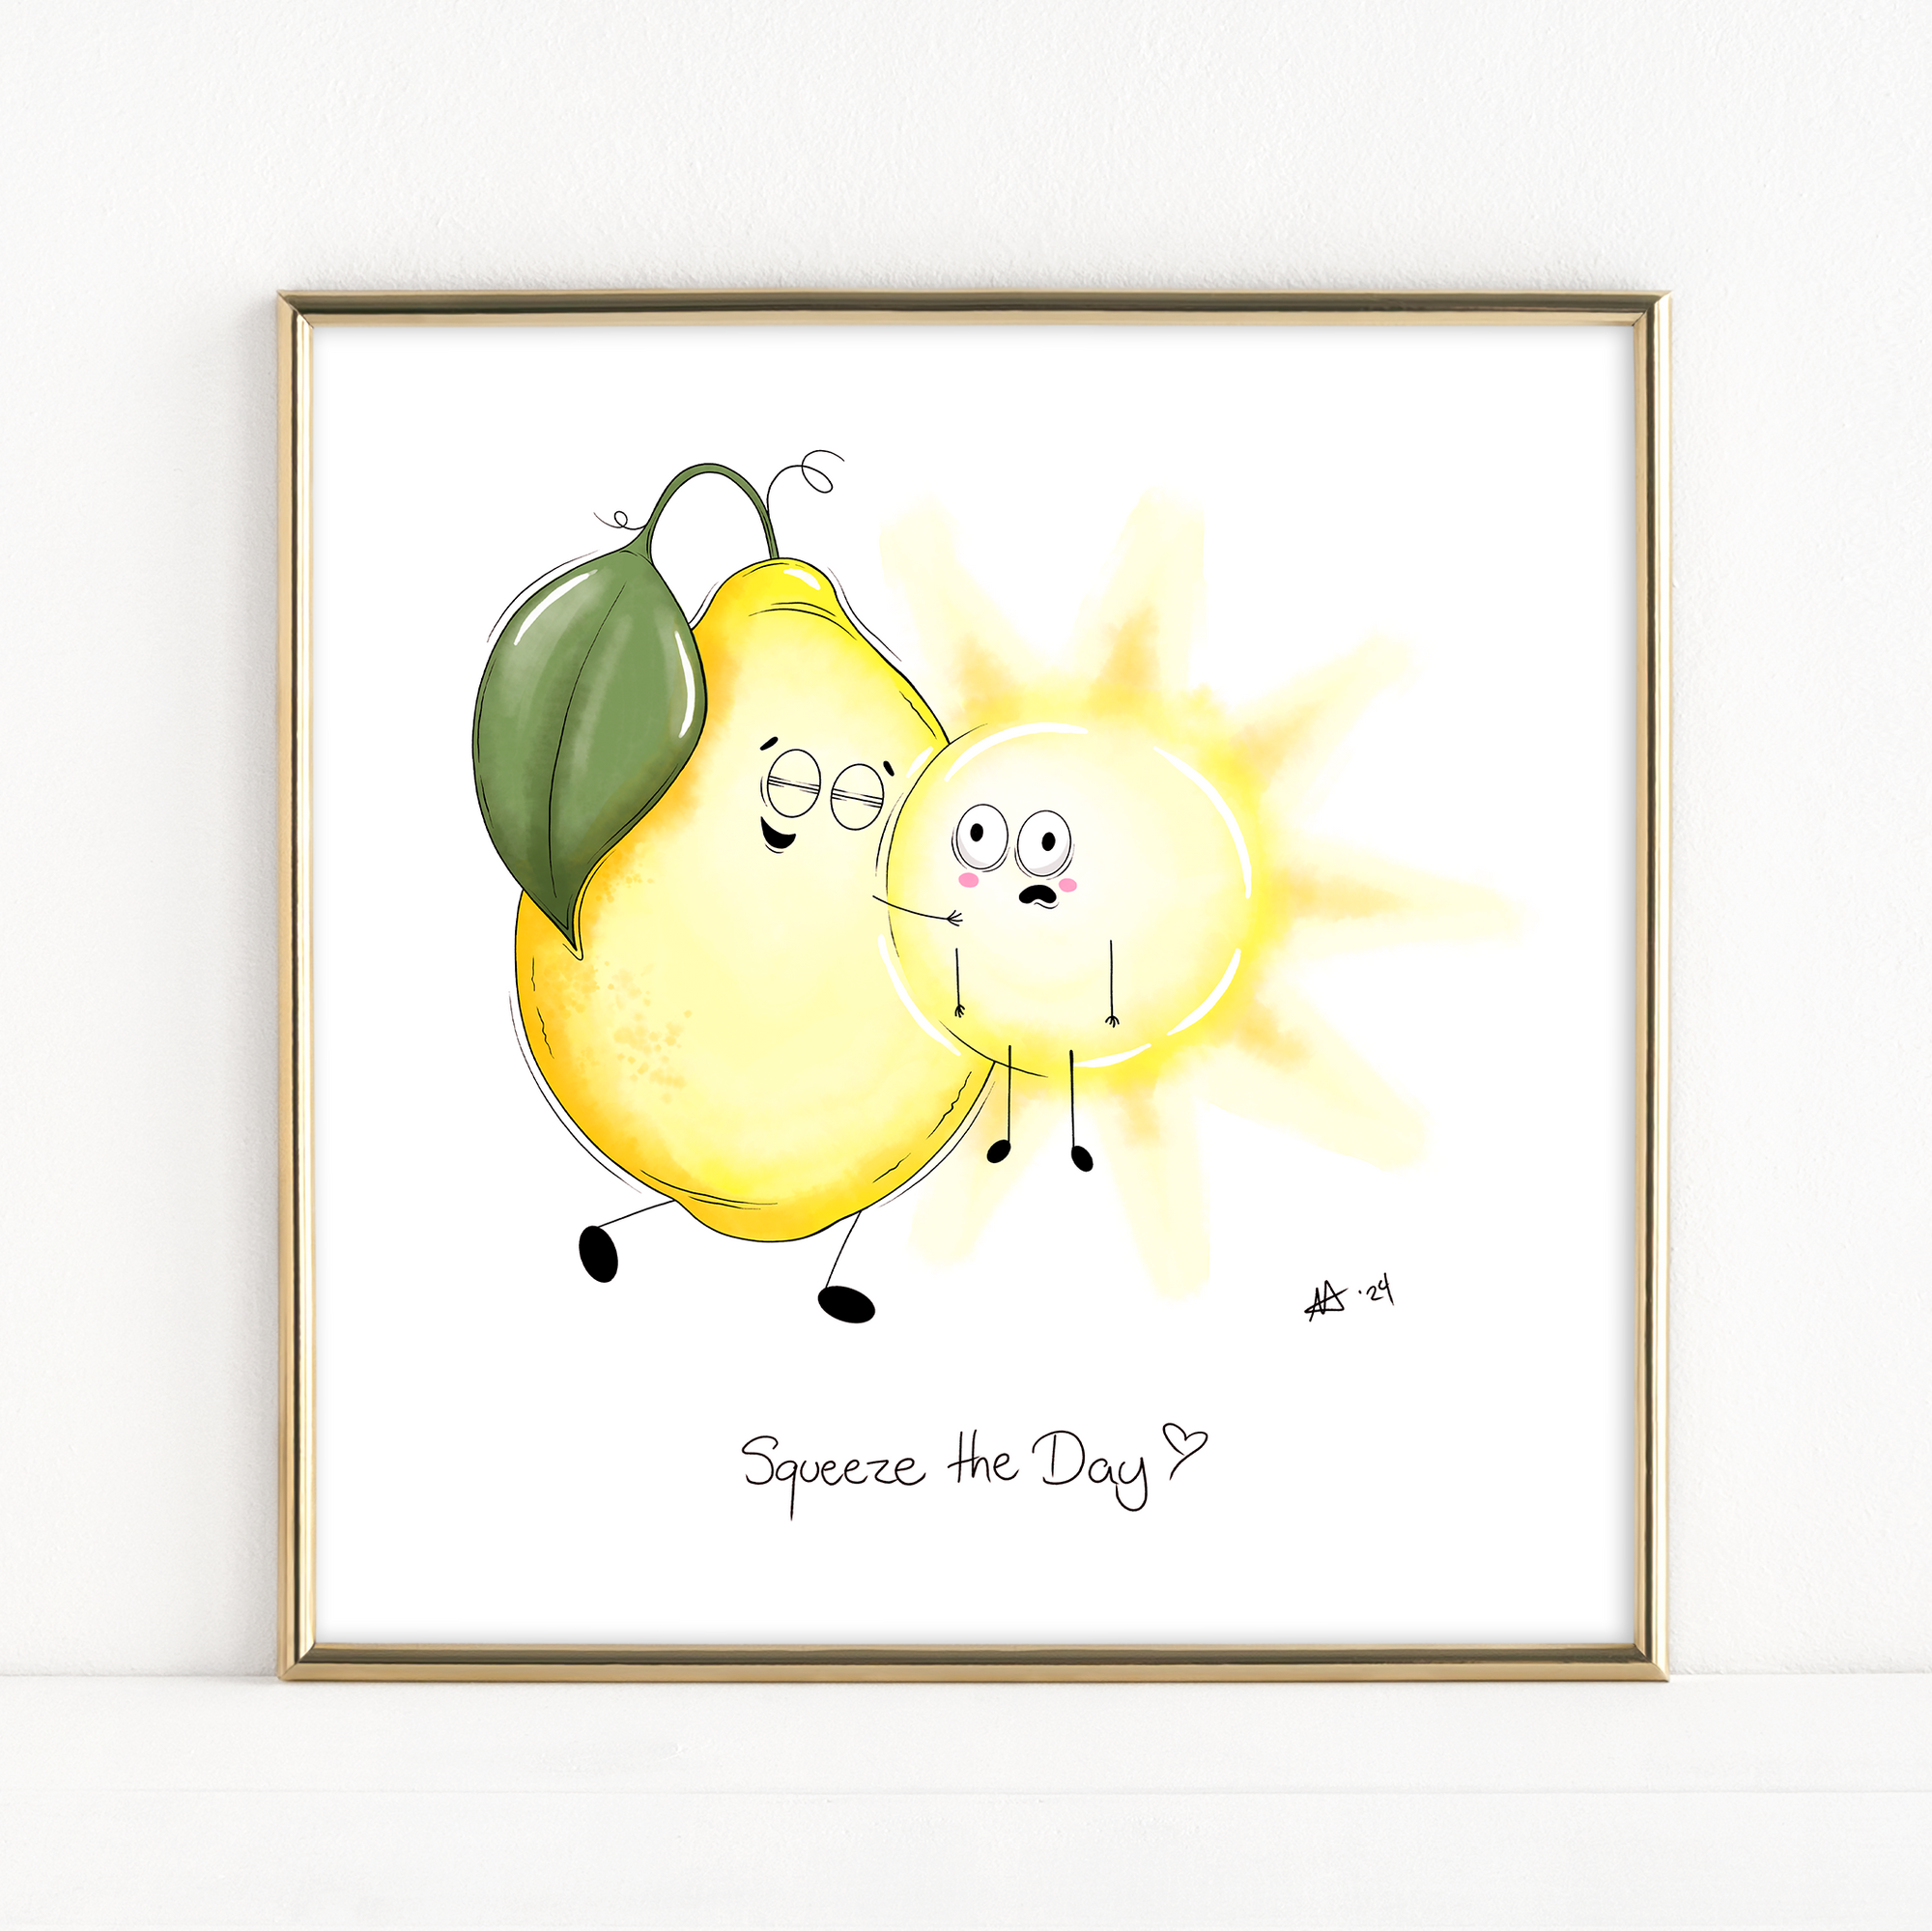 "Squeeze the Day" - Fine Art Print